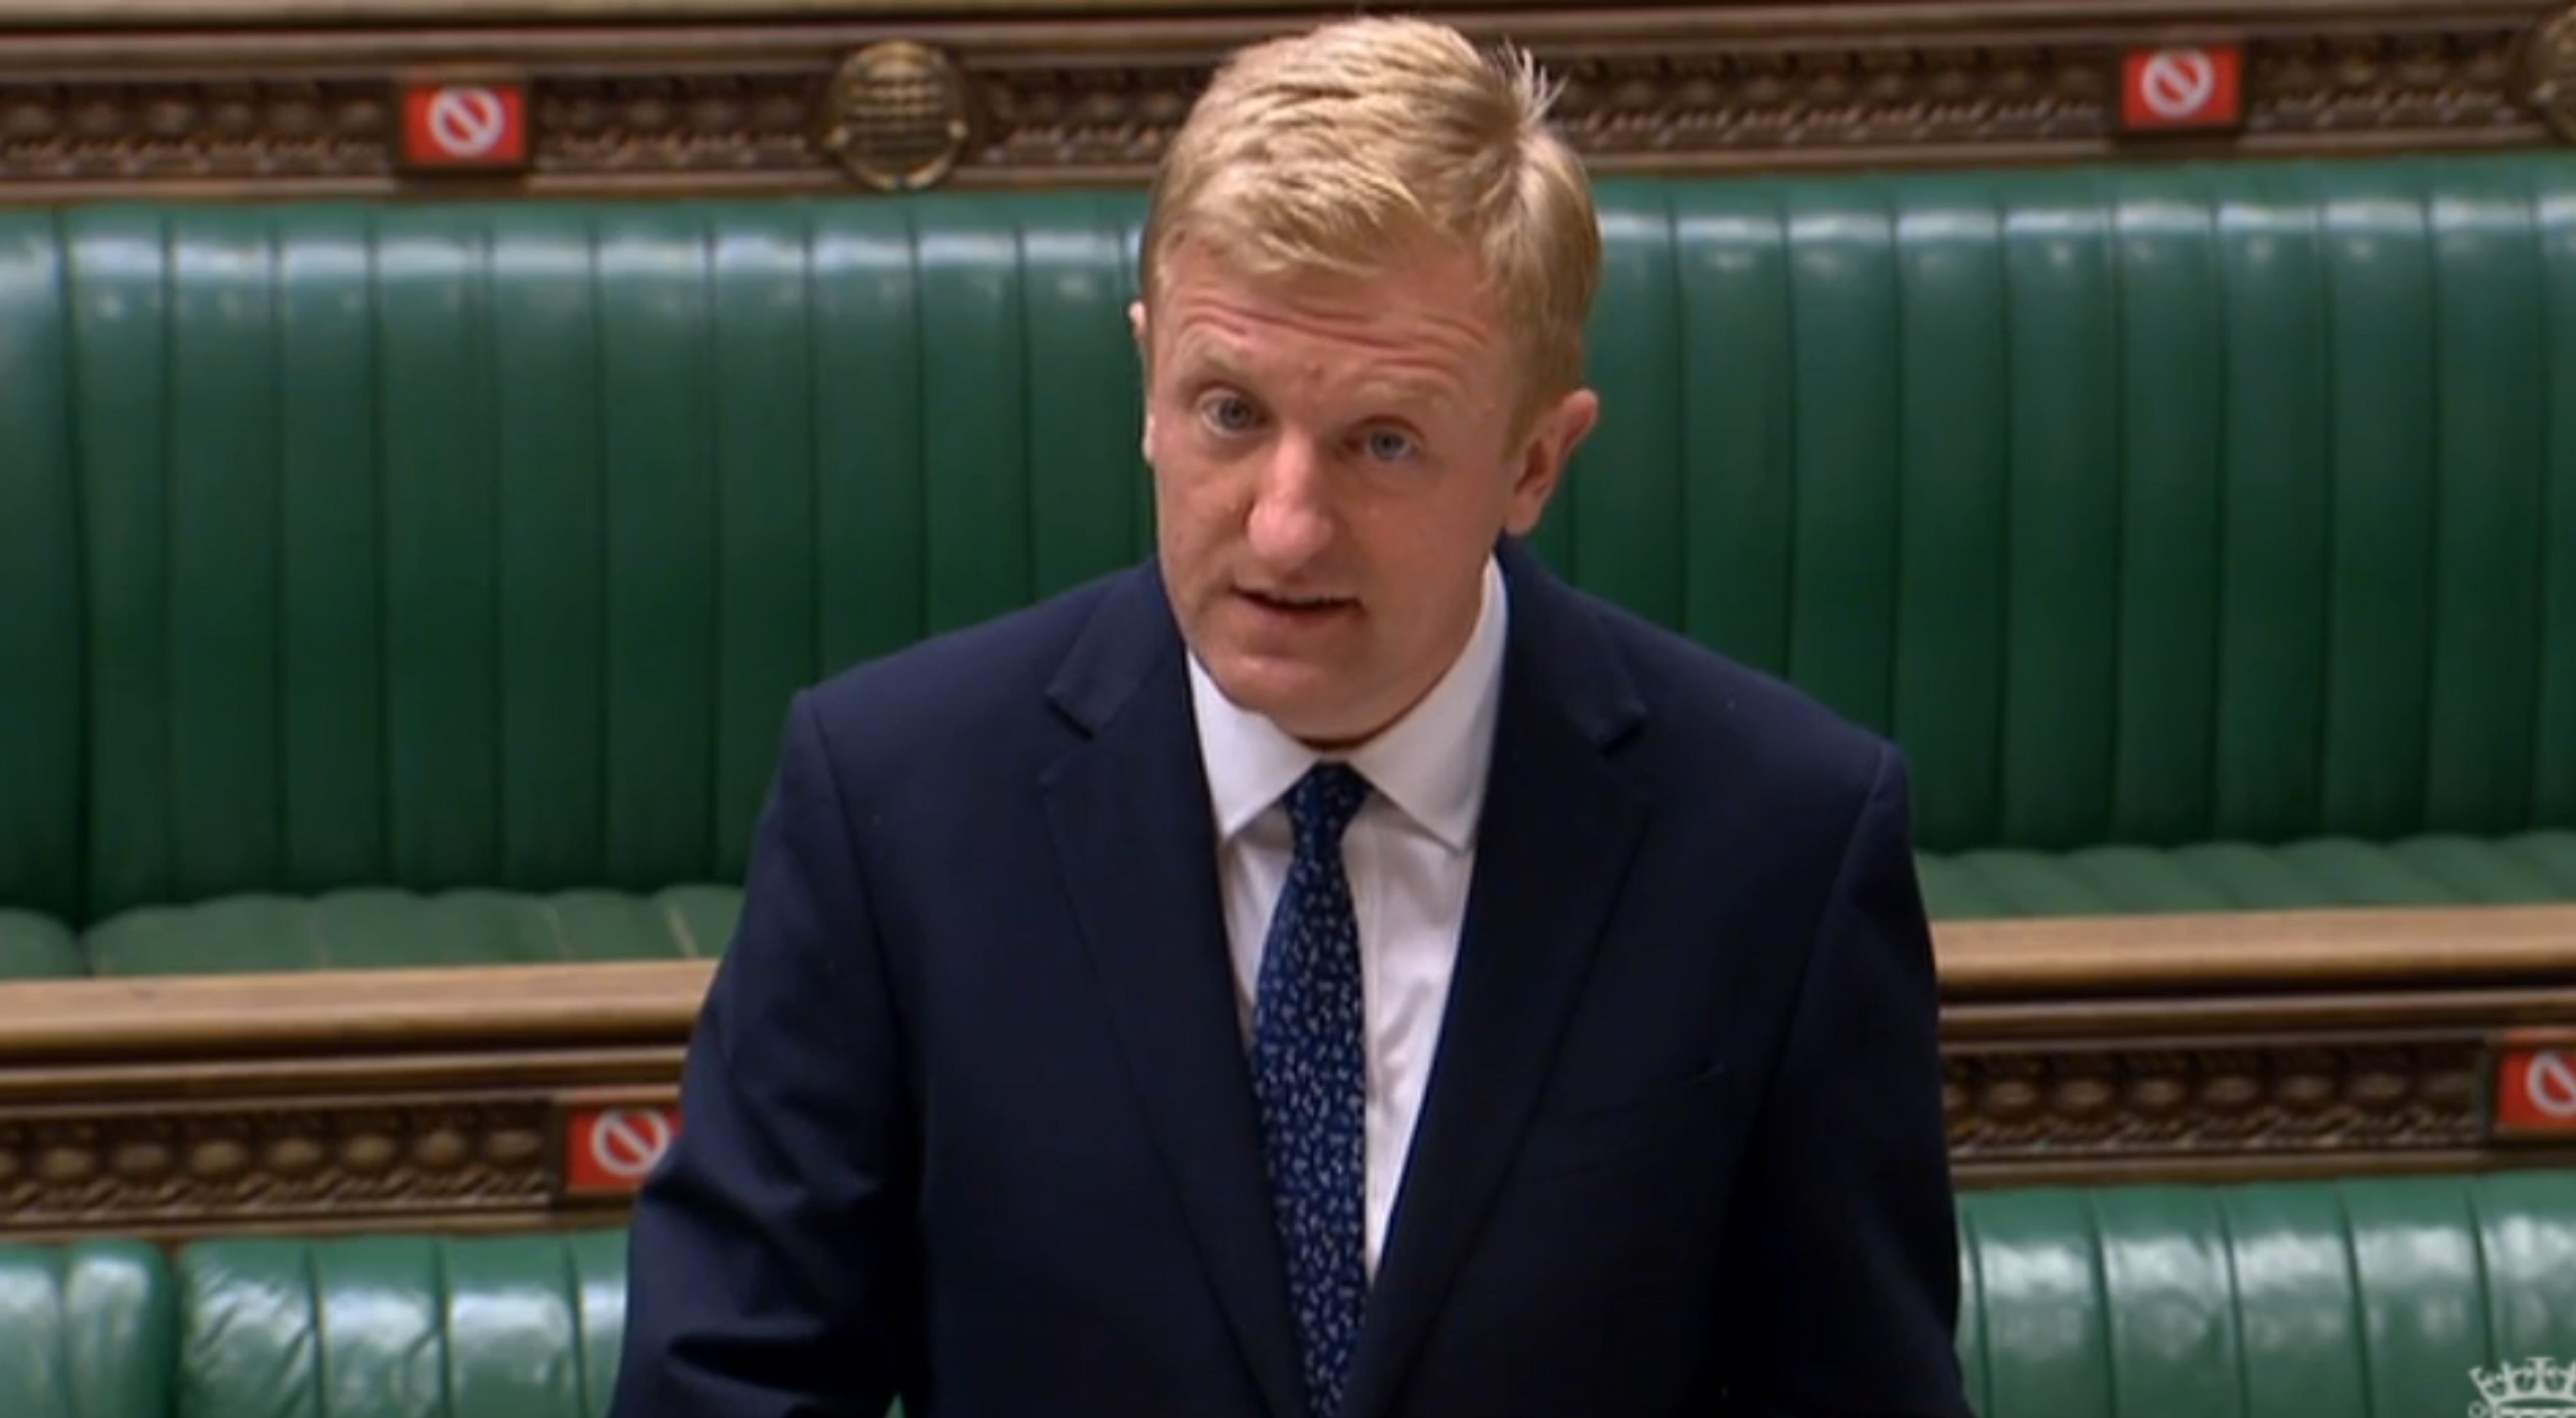 Culture secretary Oliver Dowden speaking in parliament on Monday